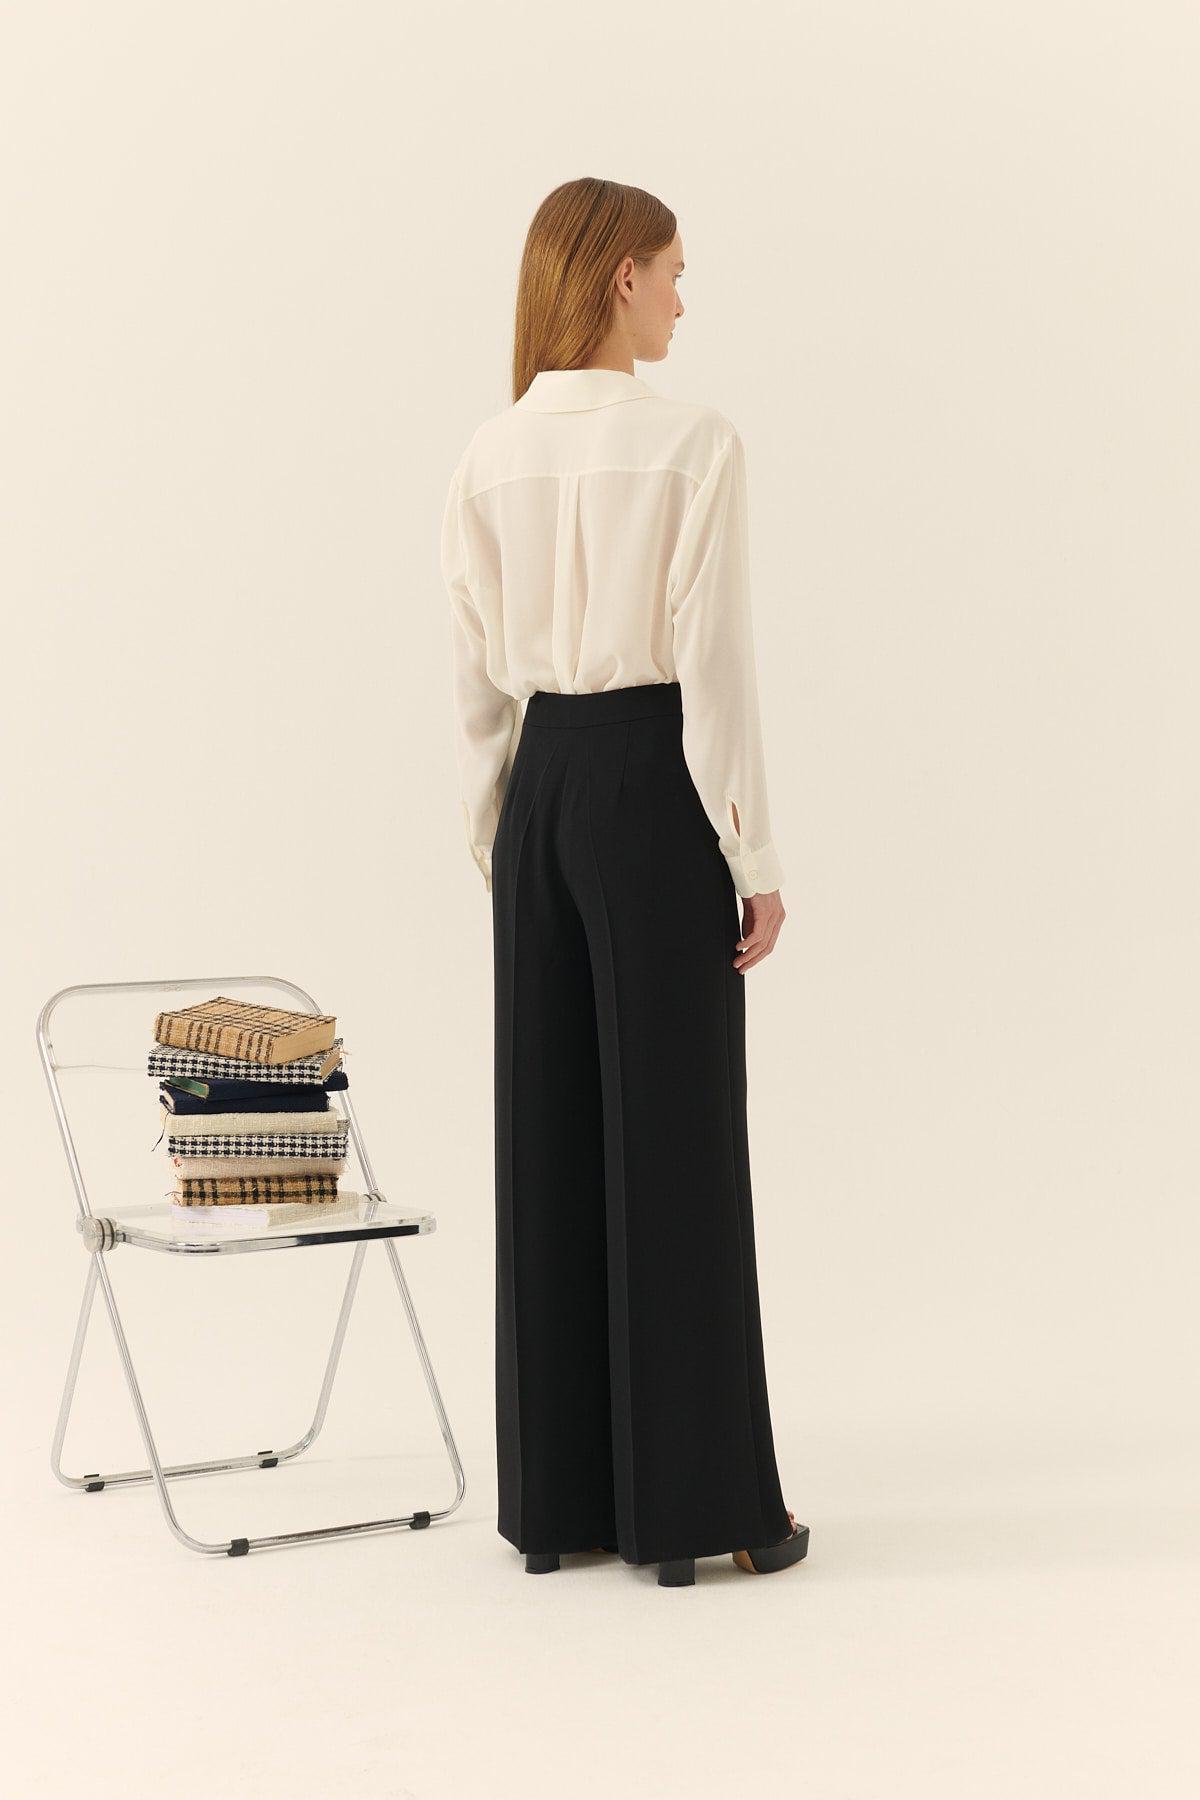 Crepe Trousers, Women's Trousers